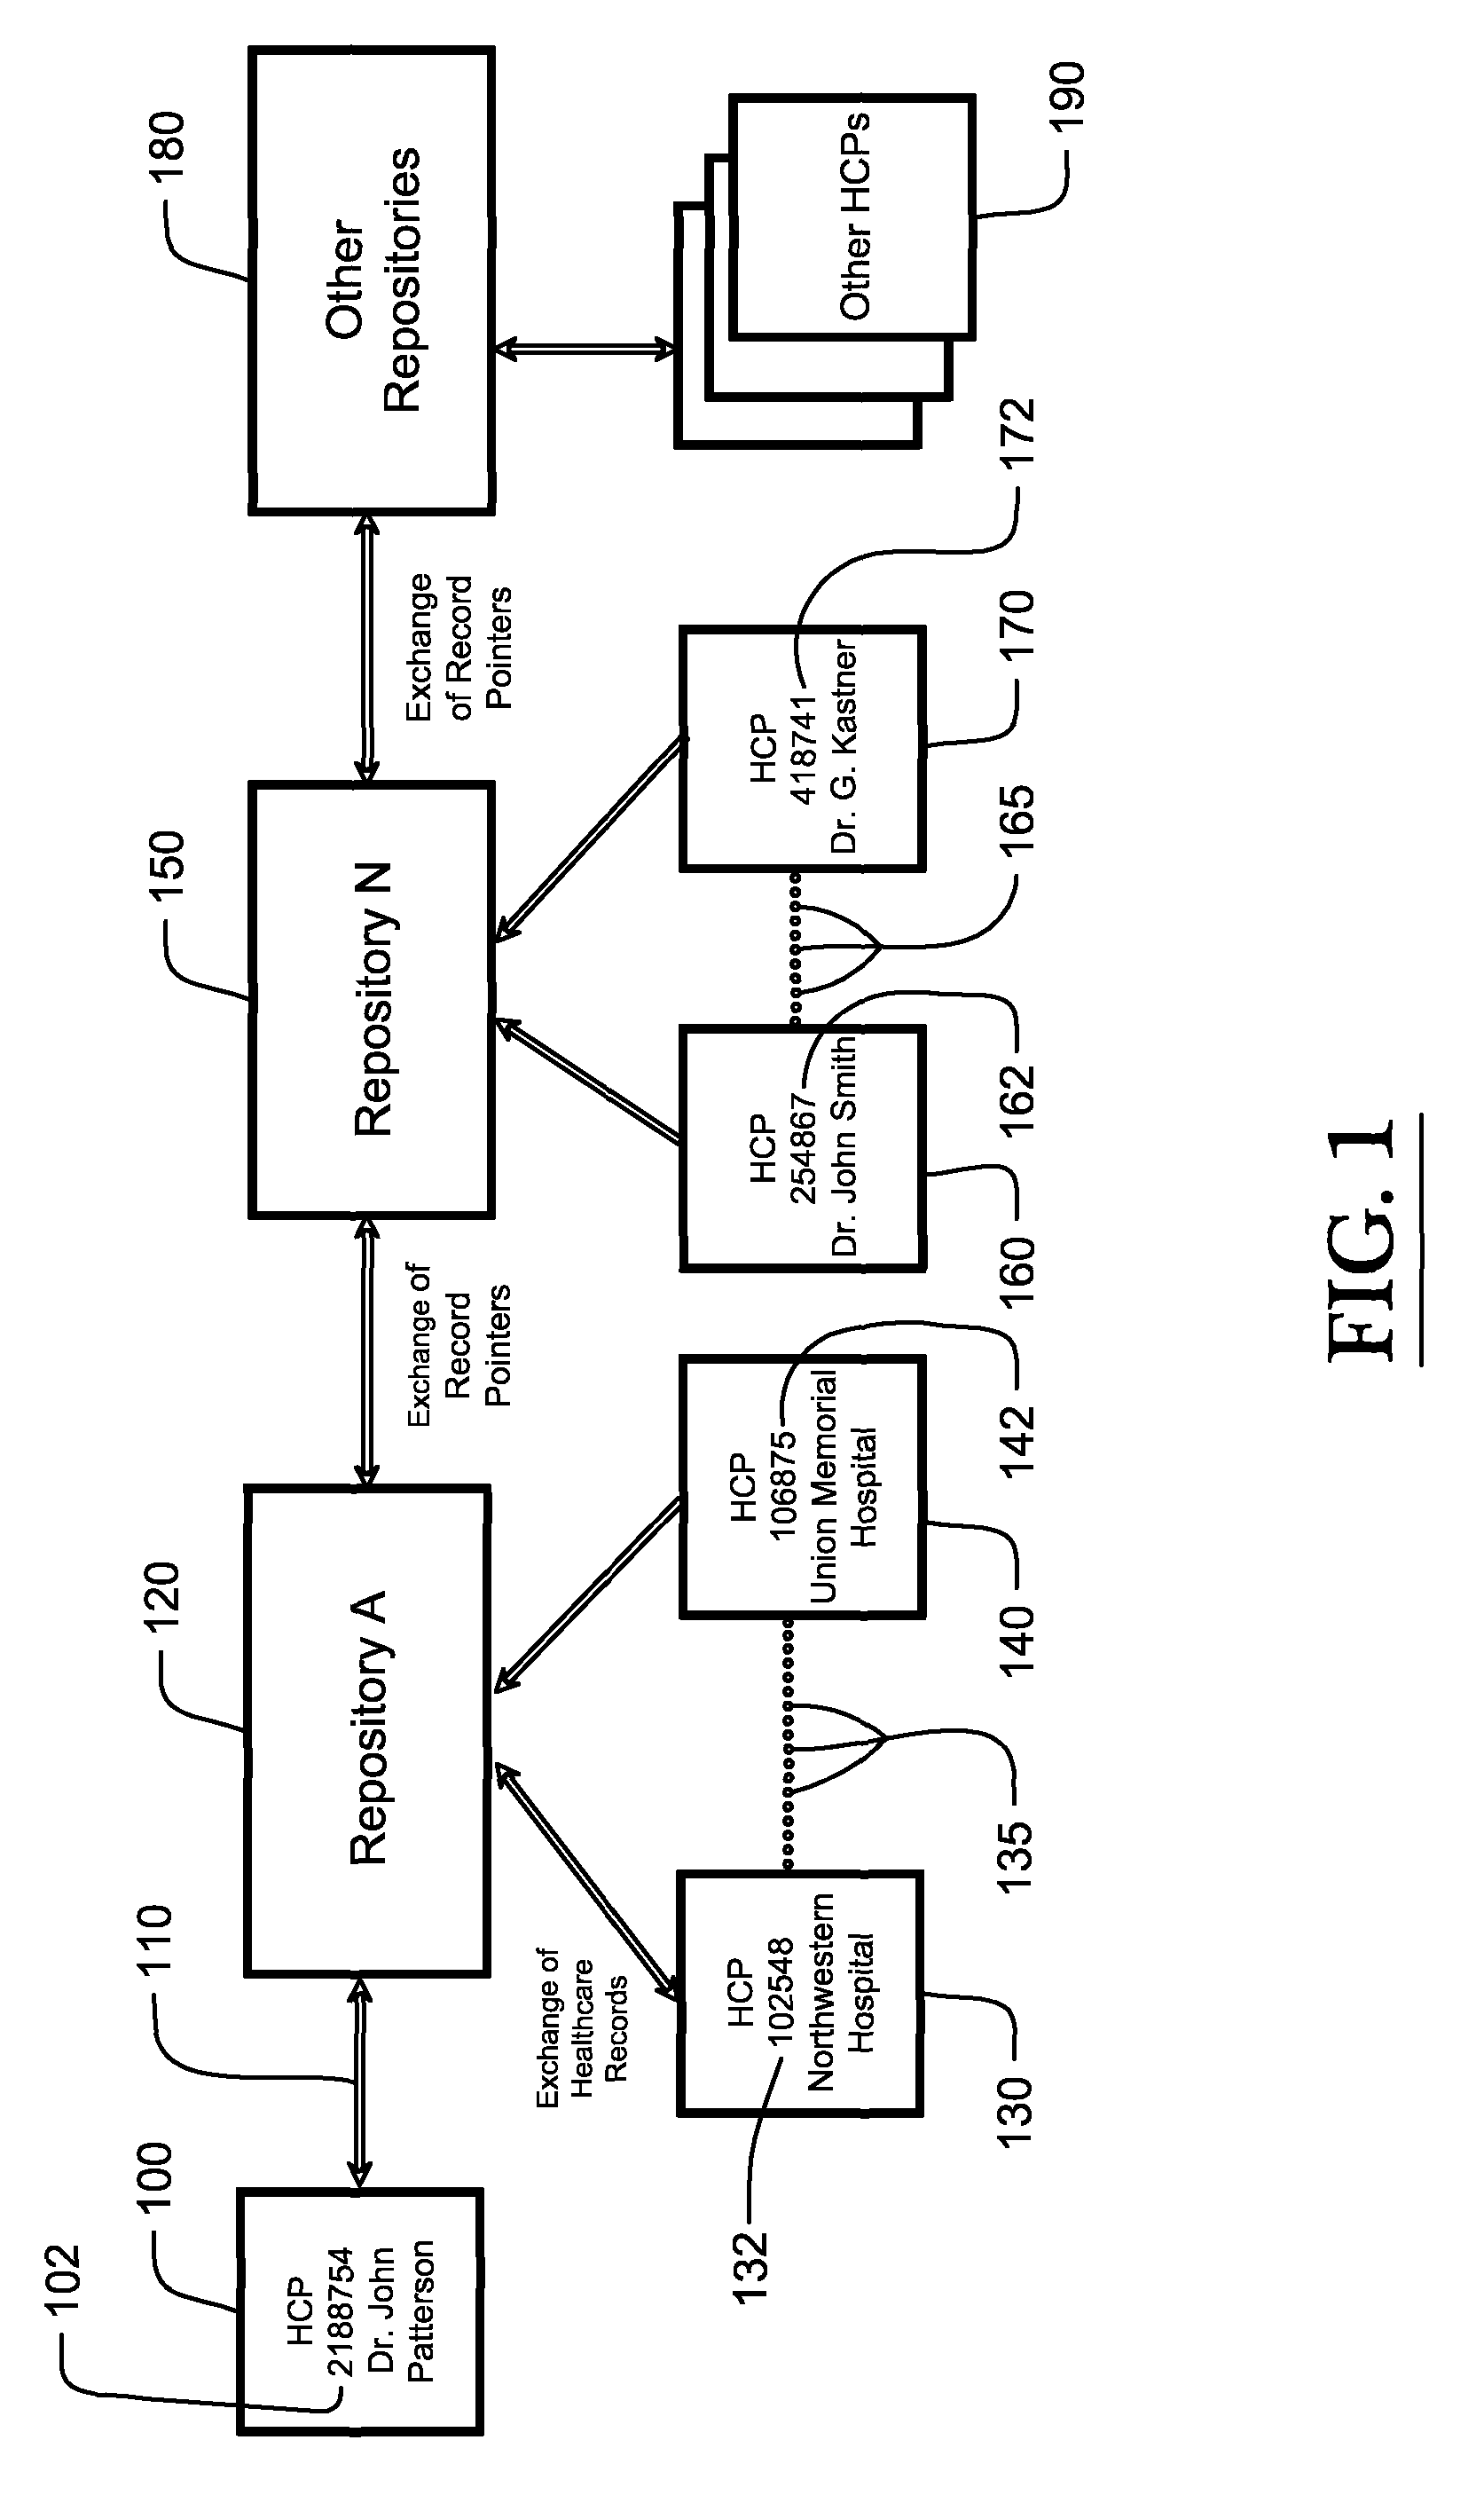 Gathering, storing, and retrieving summary electronic healthcare record information from healthcare providers